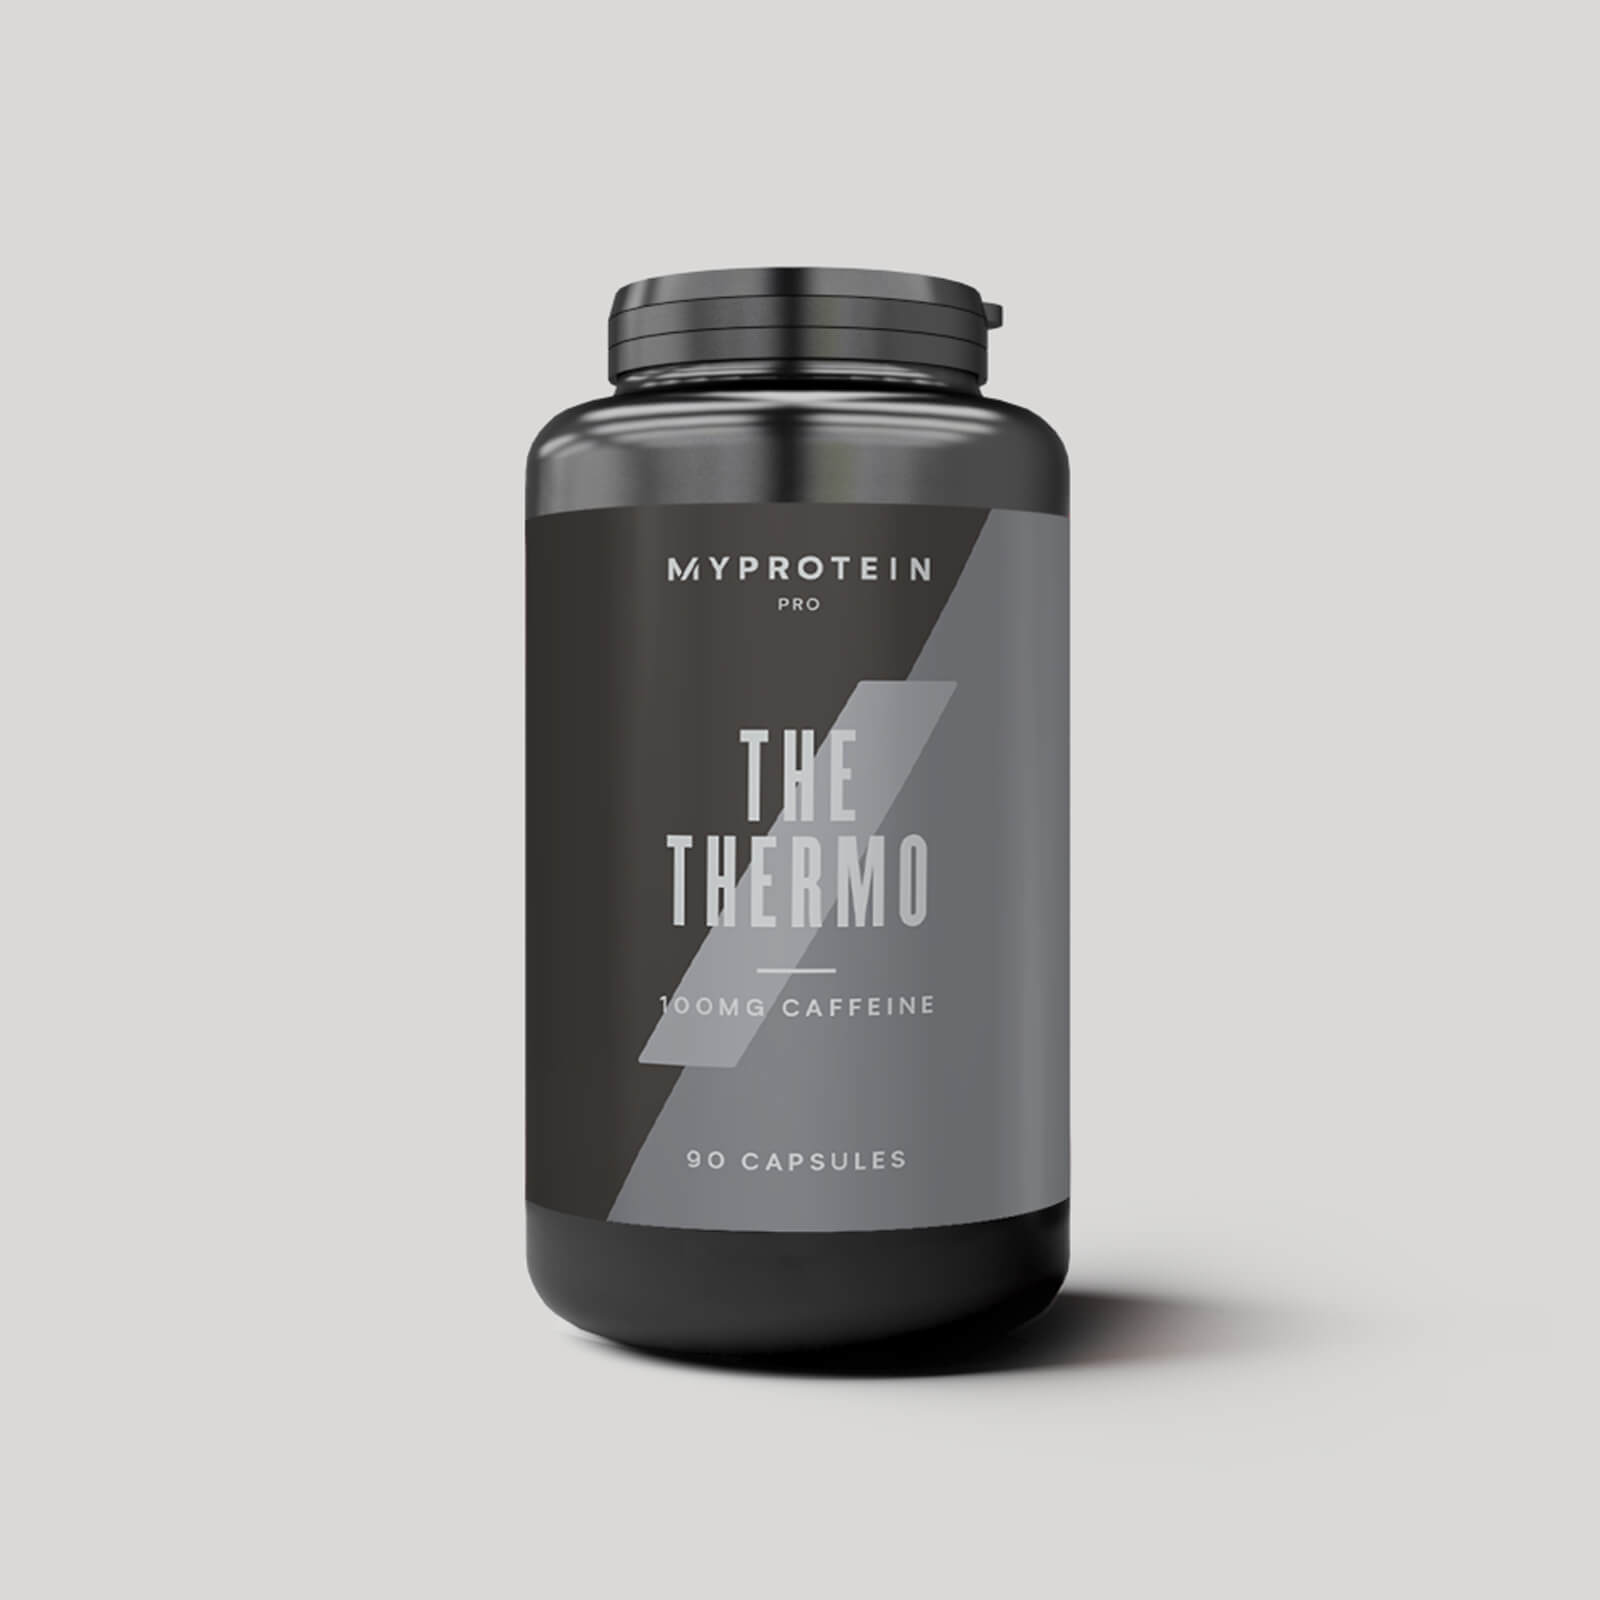 THE Thermo - 90capsules